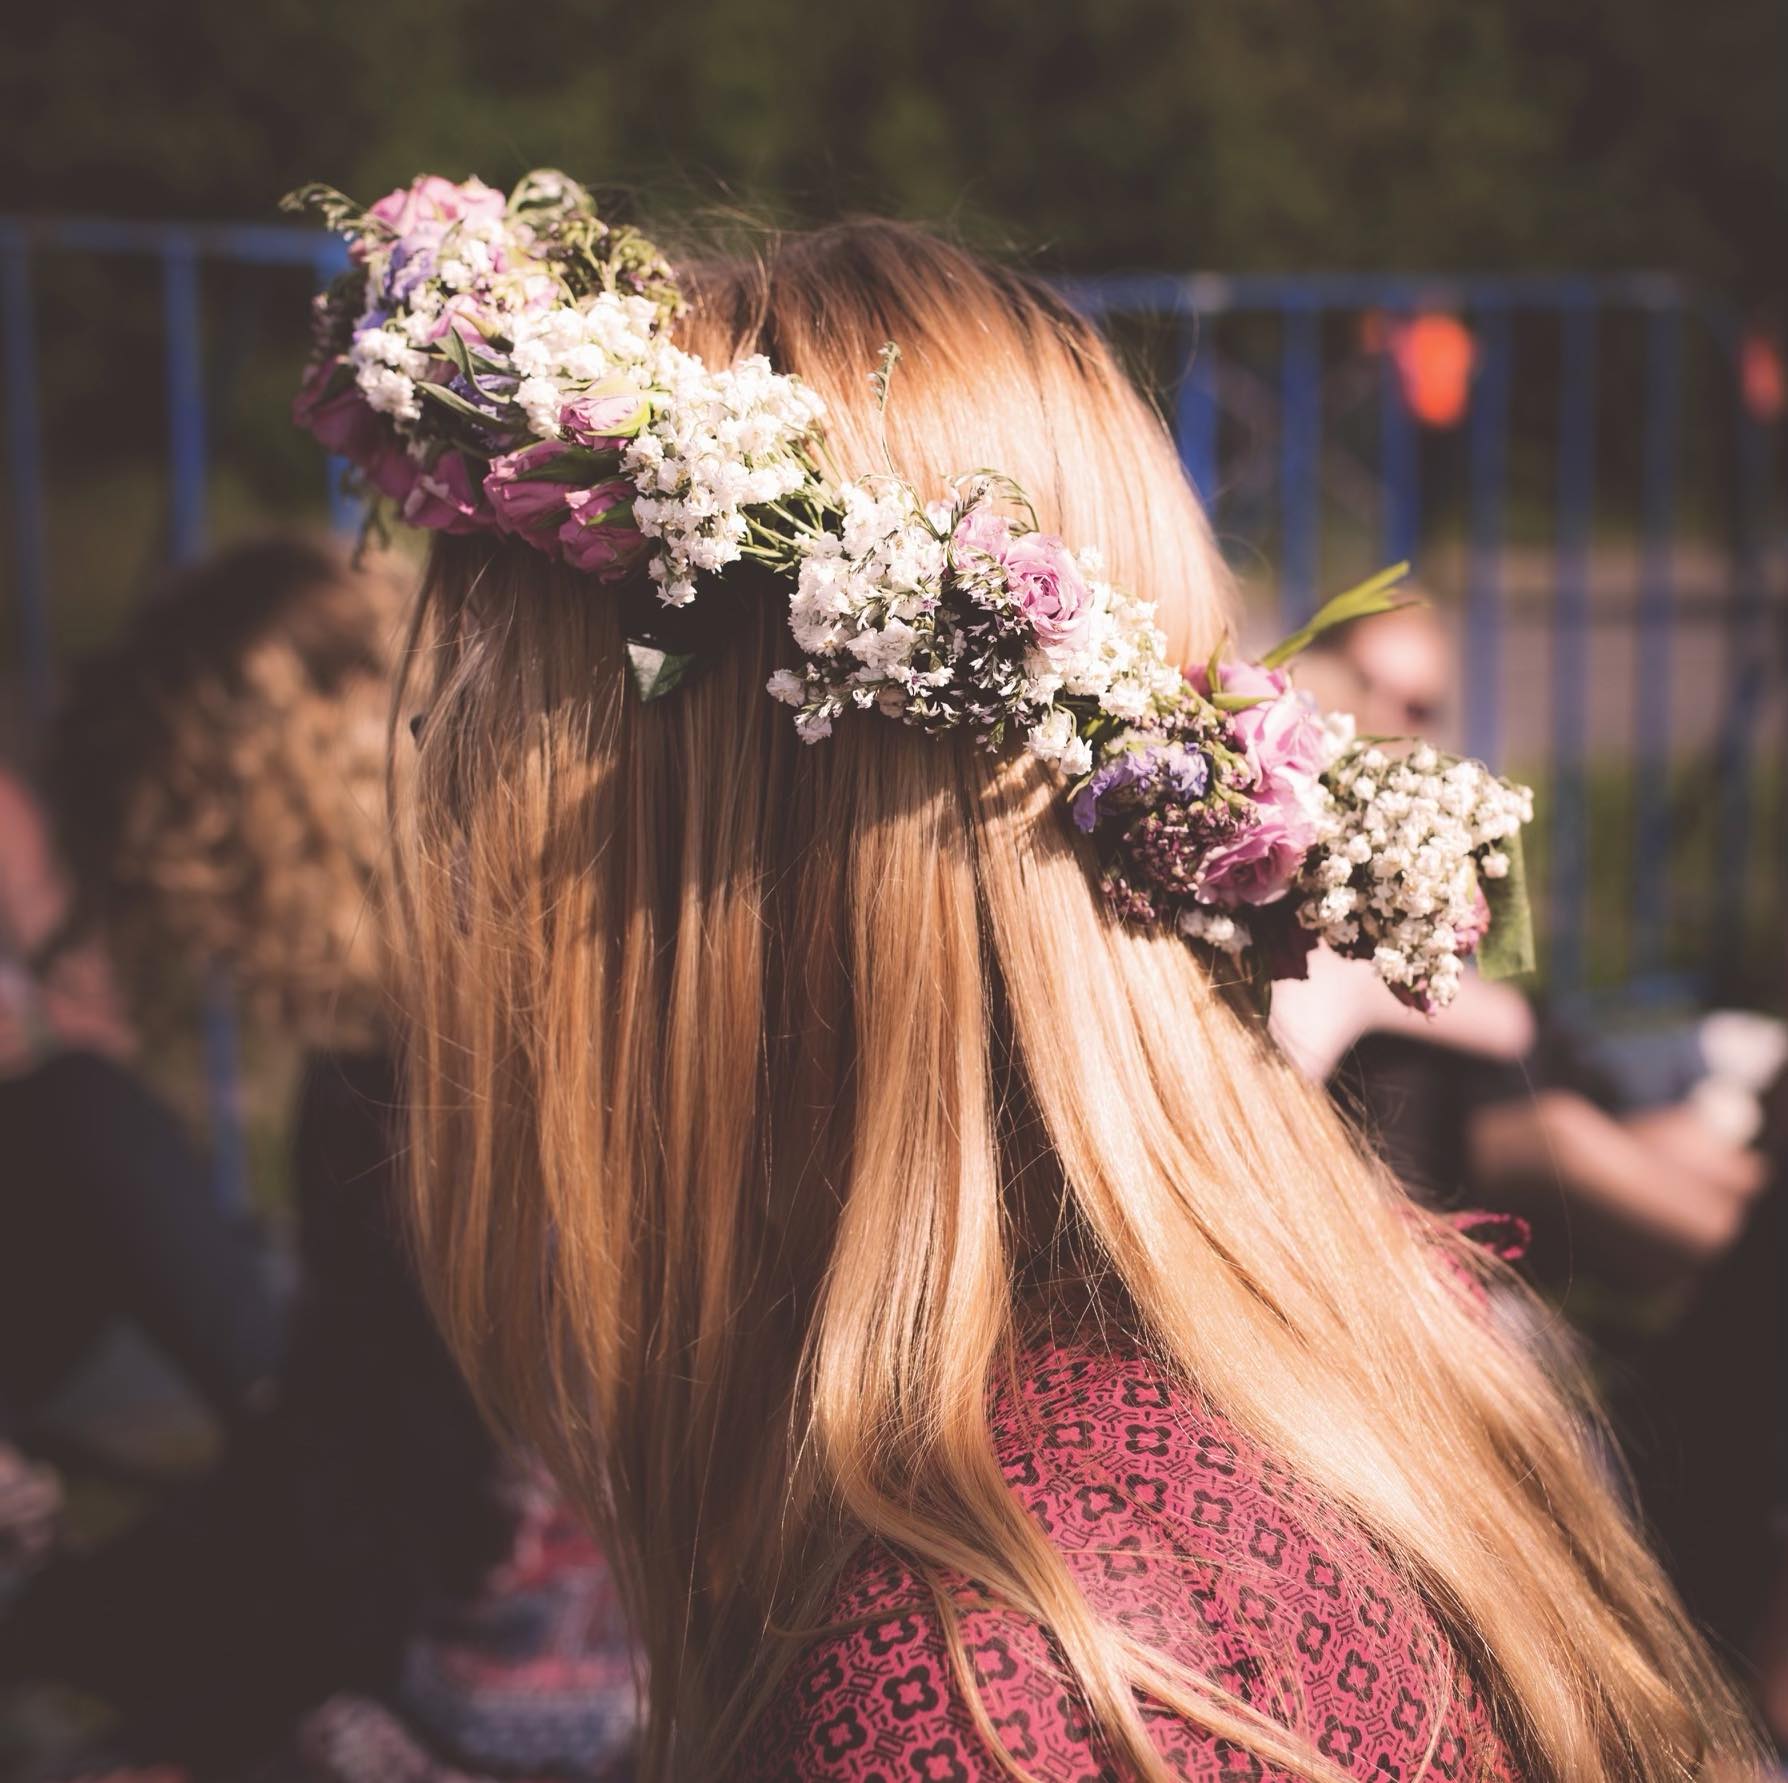 Woman looking away from the camera with a crown of flowers on her head.